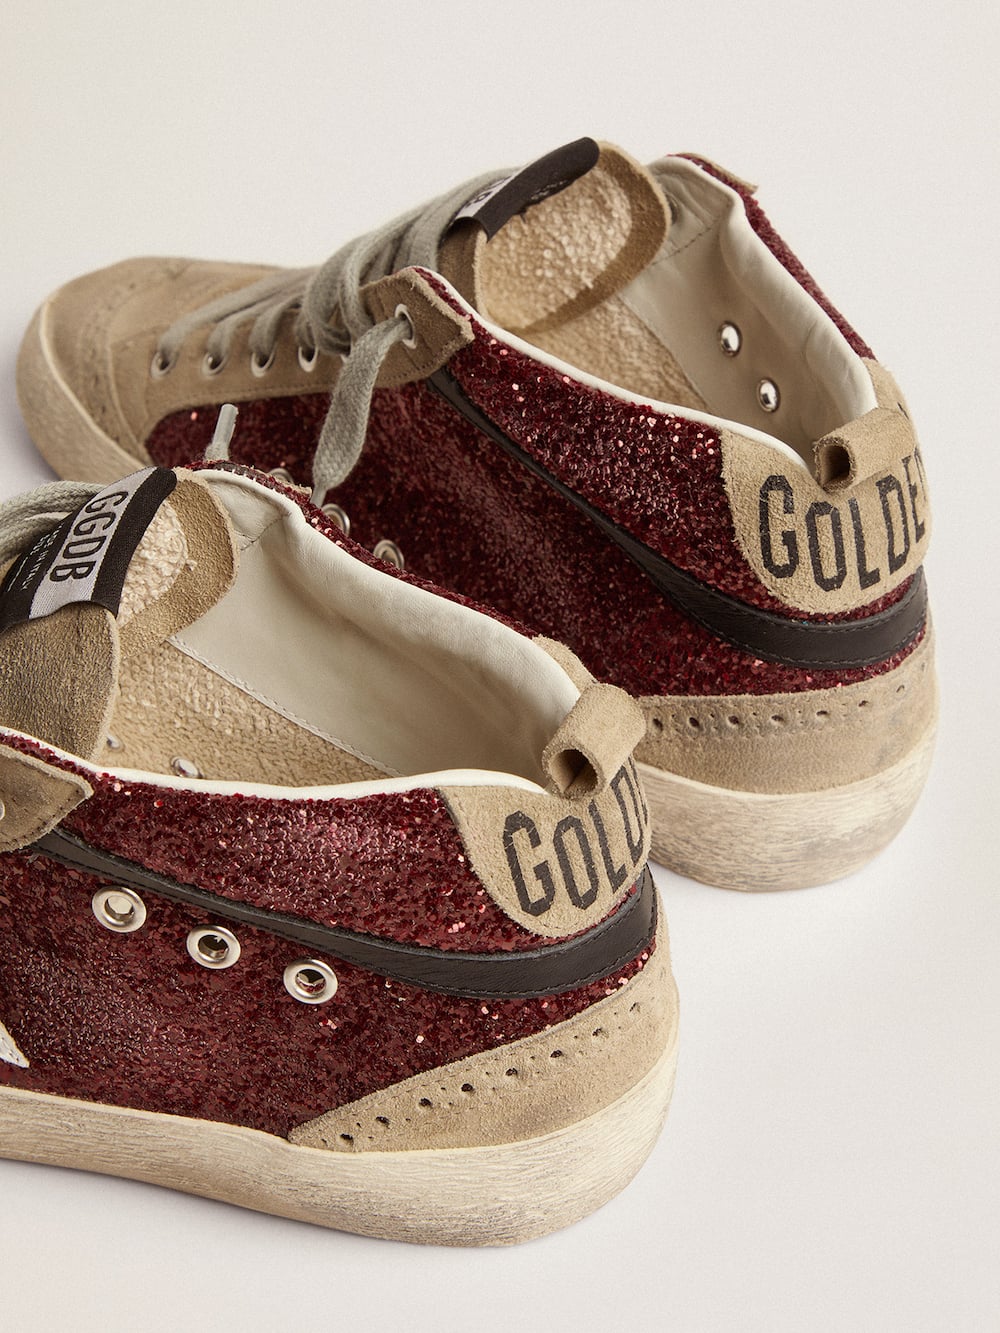 Golden Goose - Women's Mid Star in burgundy glitter with gray inserts and white star in 